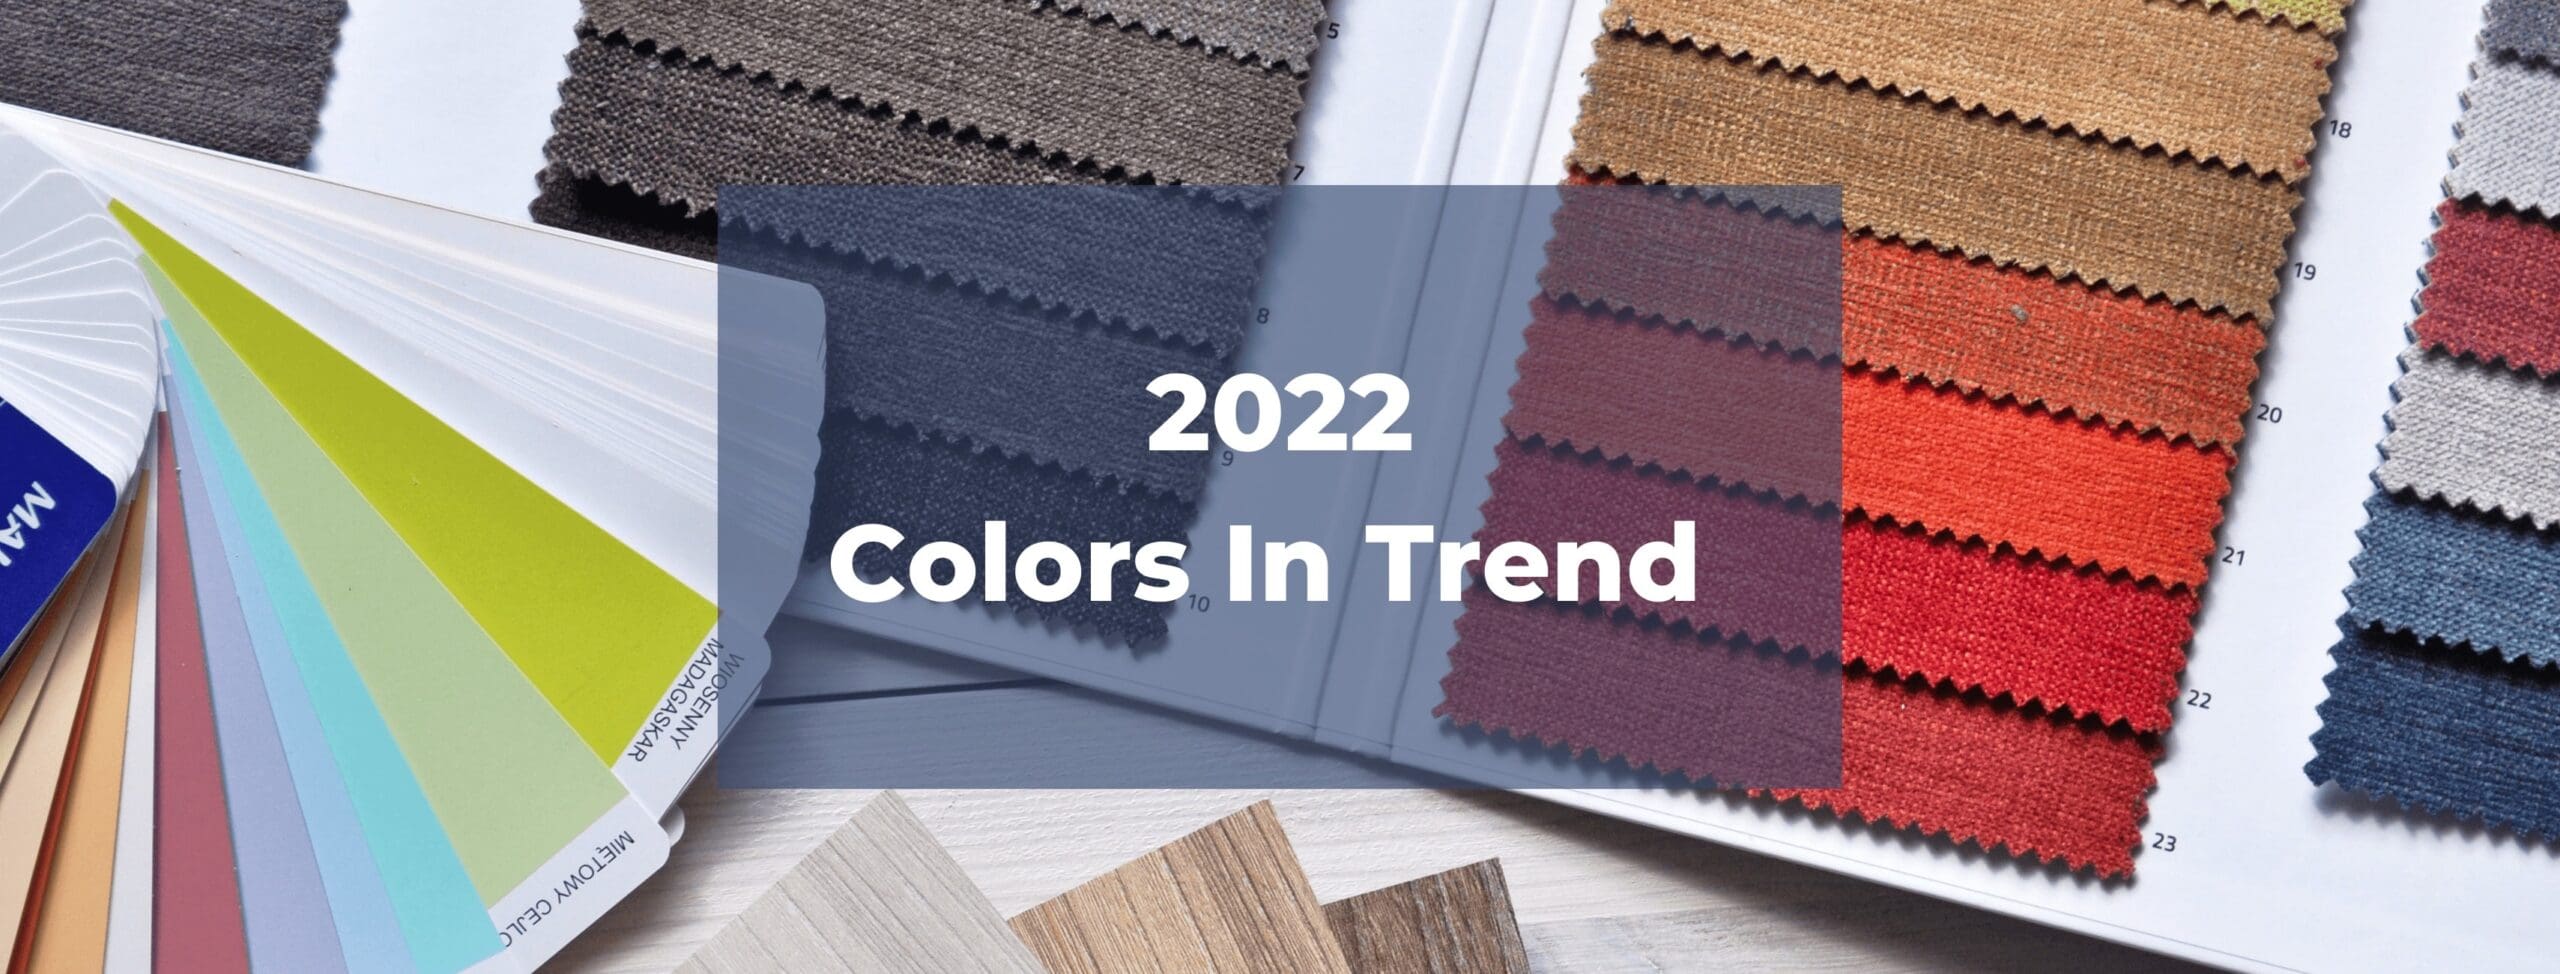 2022 Colors In Trend